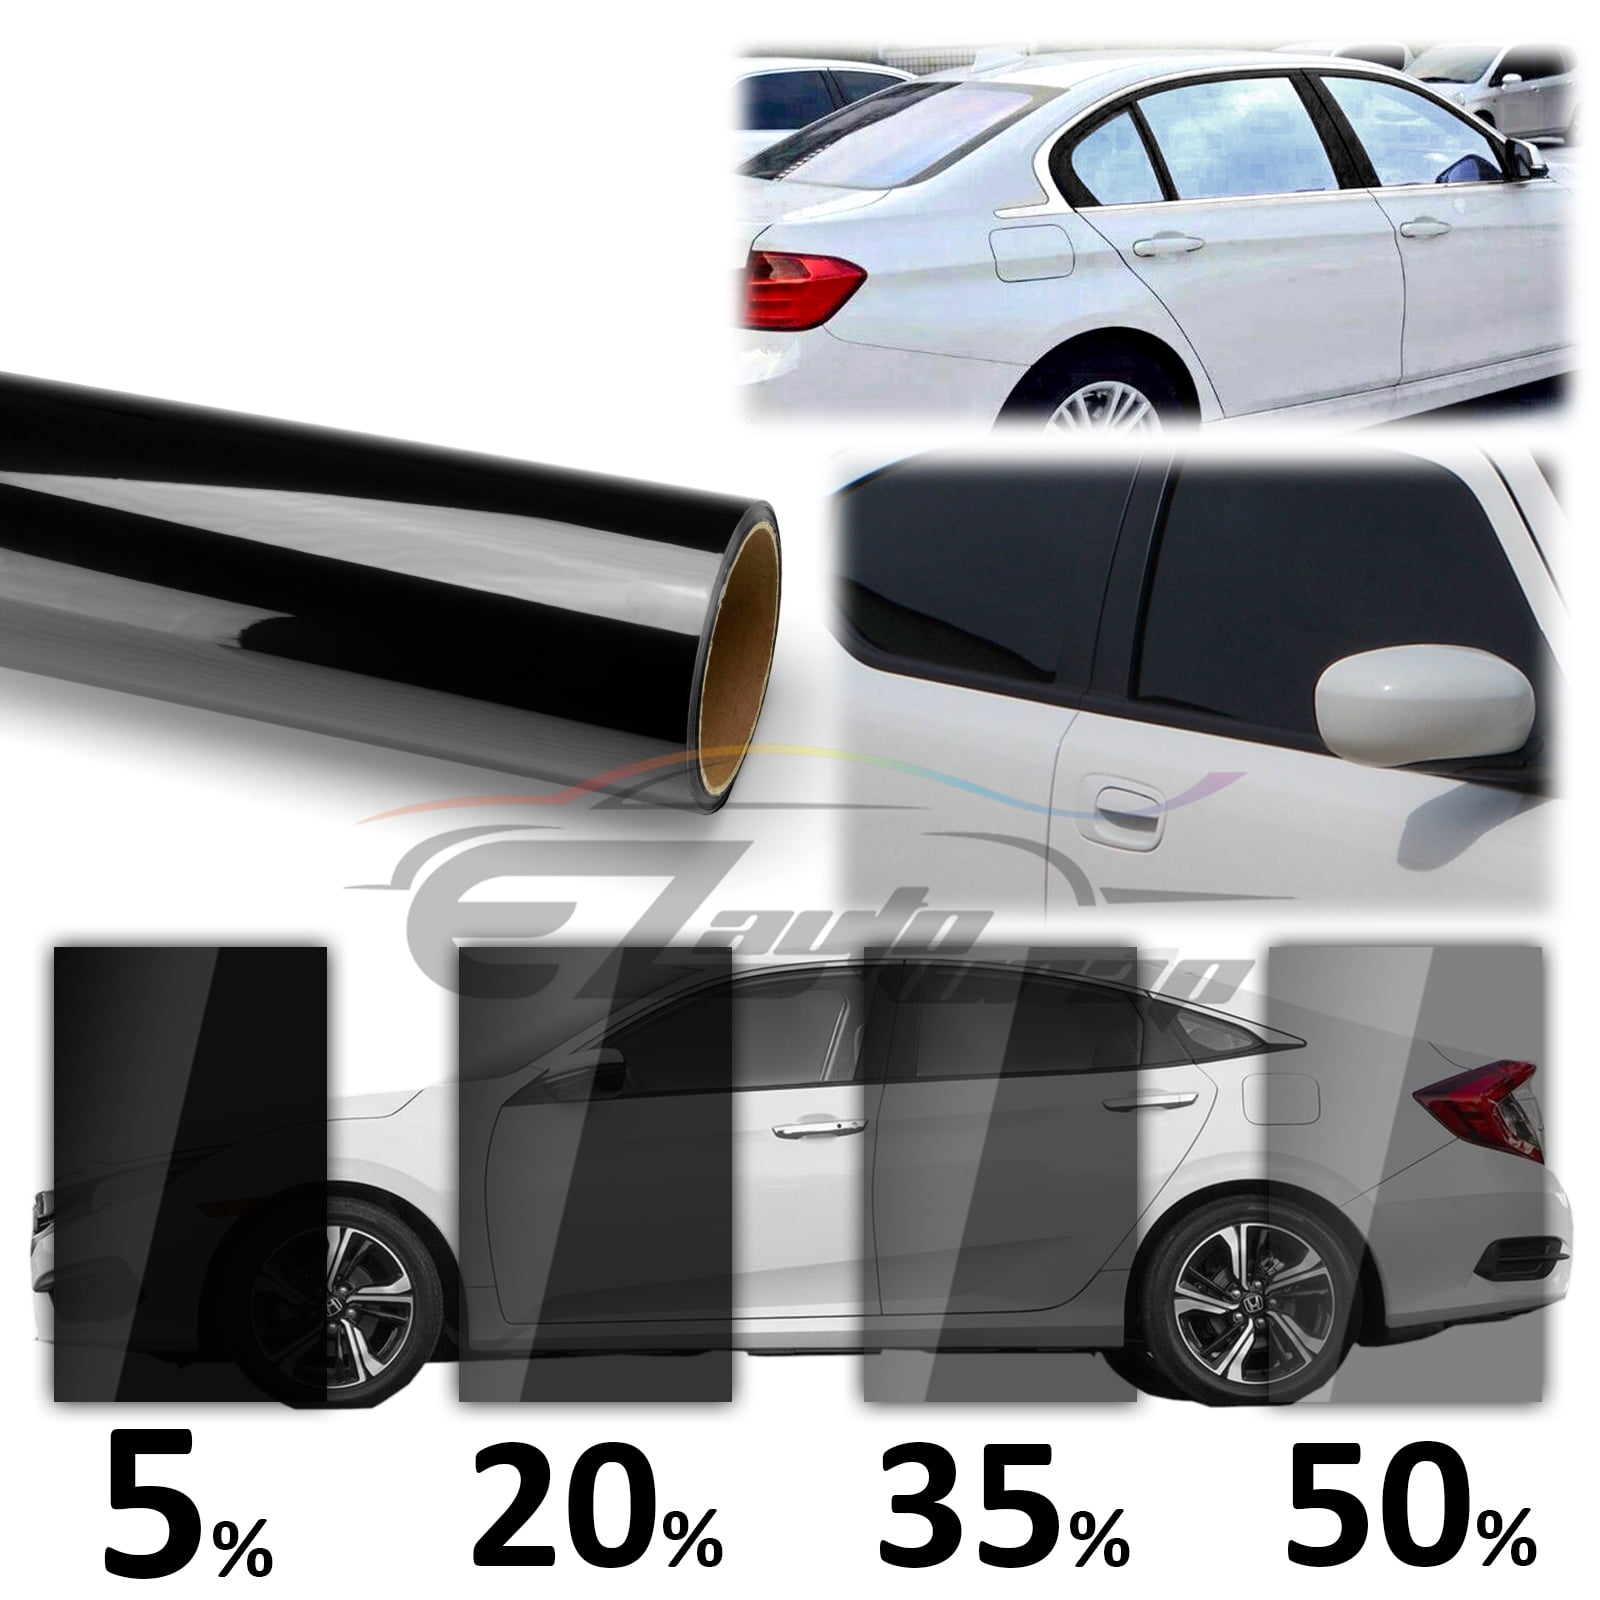 50x300cm Baosity 50% VLT Black Uncut Glass Window Tint Shade Film Roll for Car Home Commercial Office Boat 